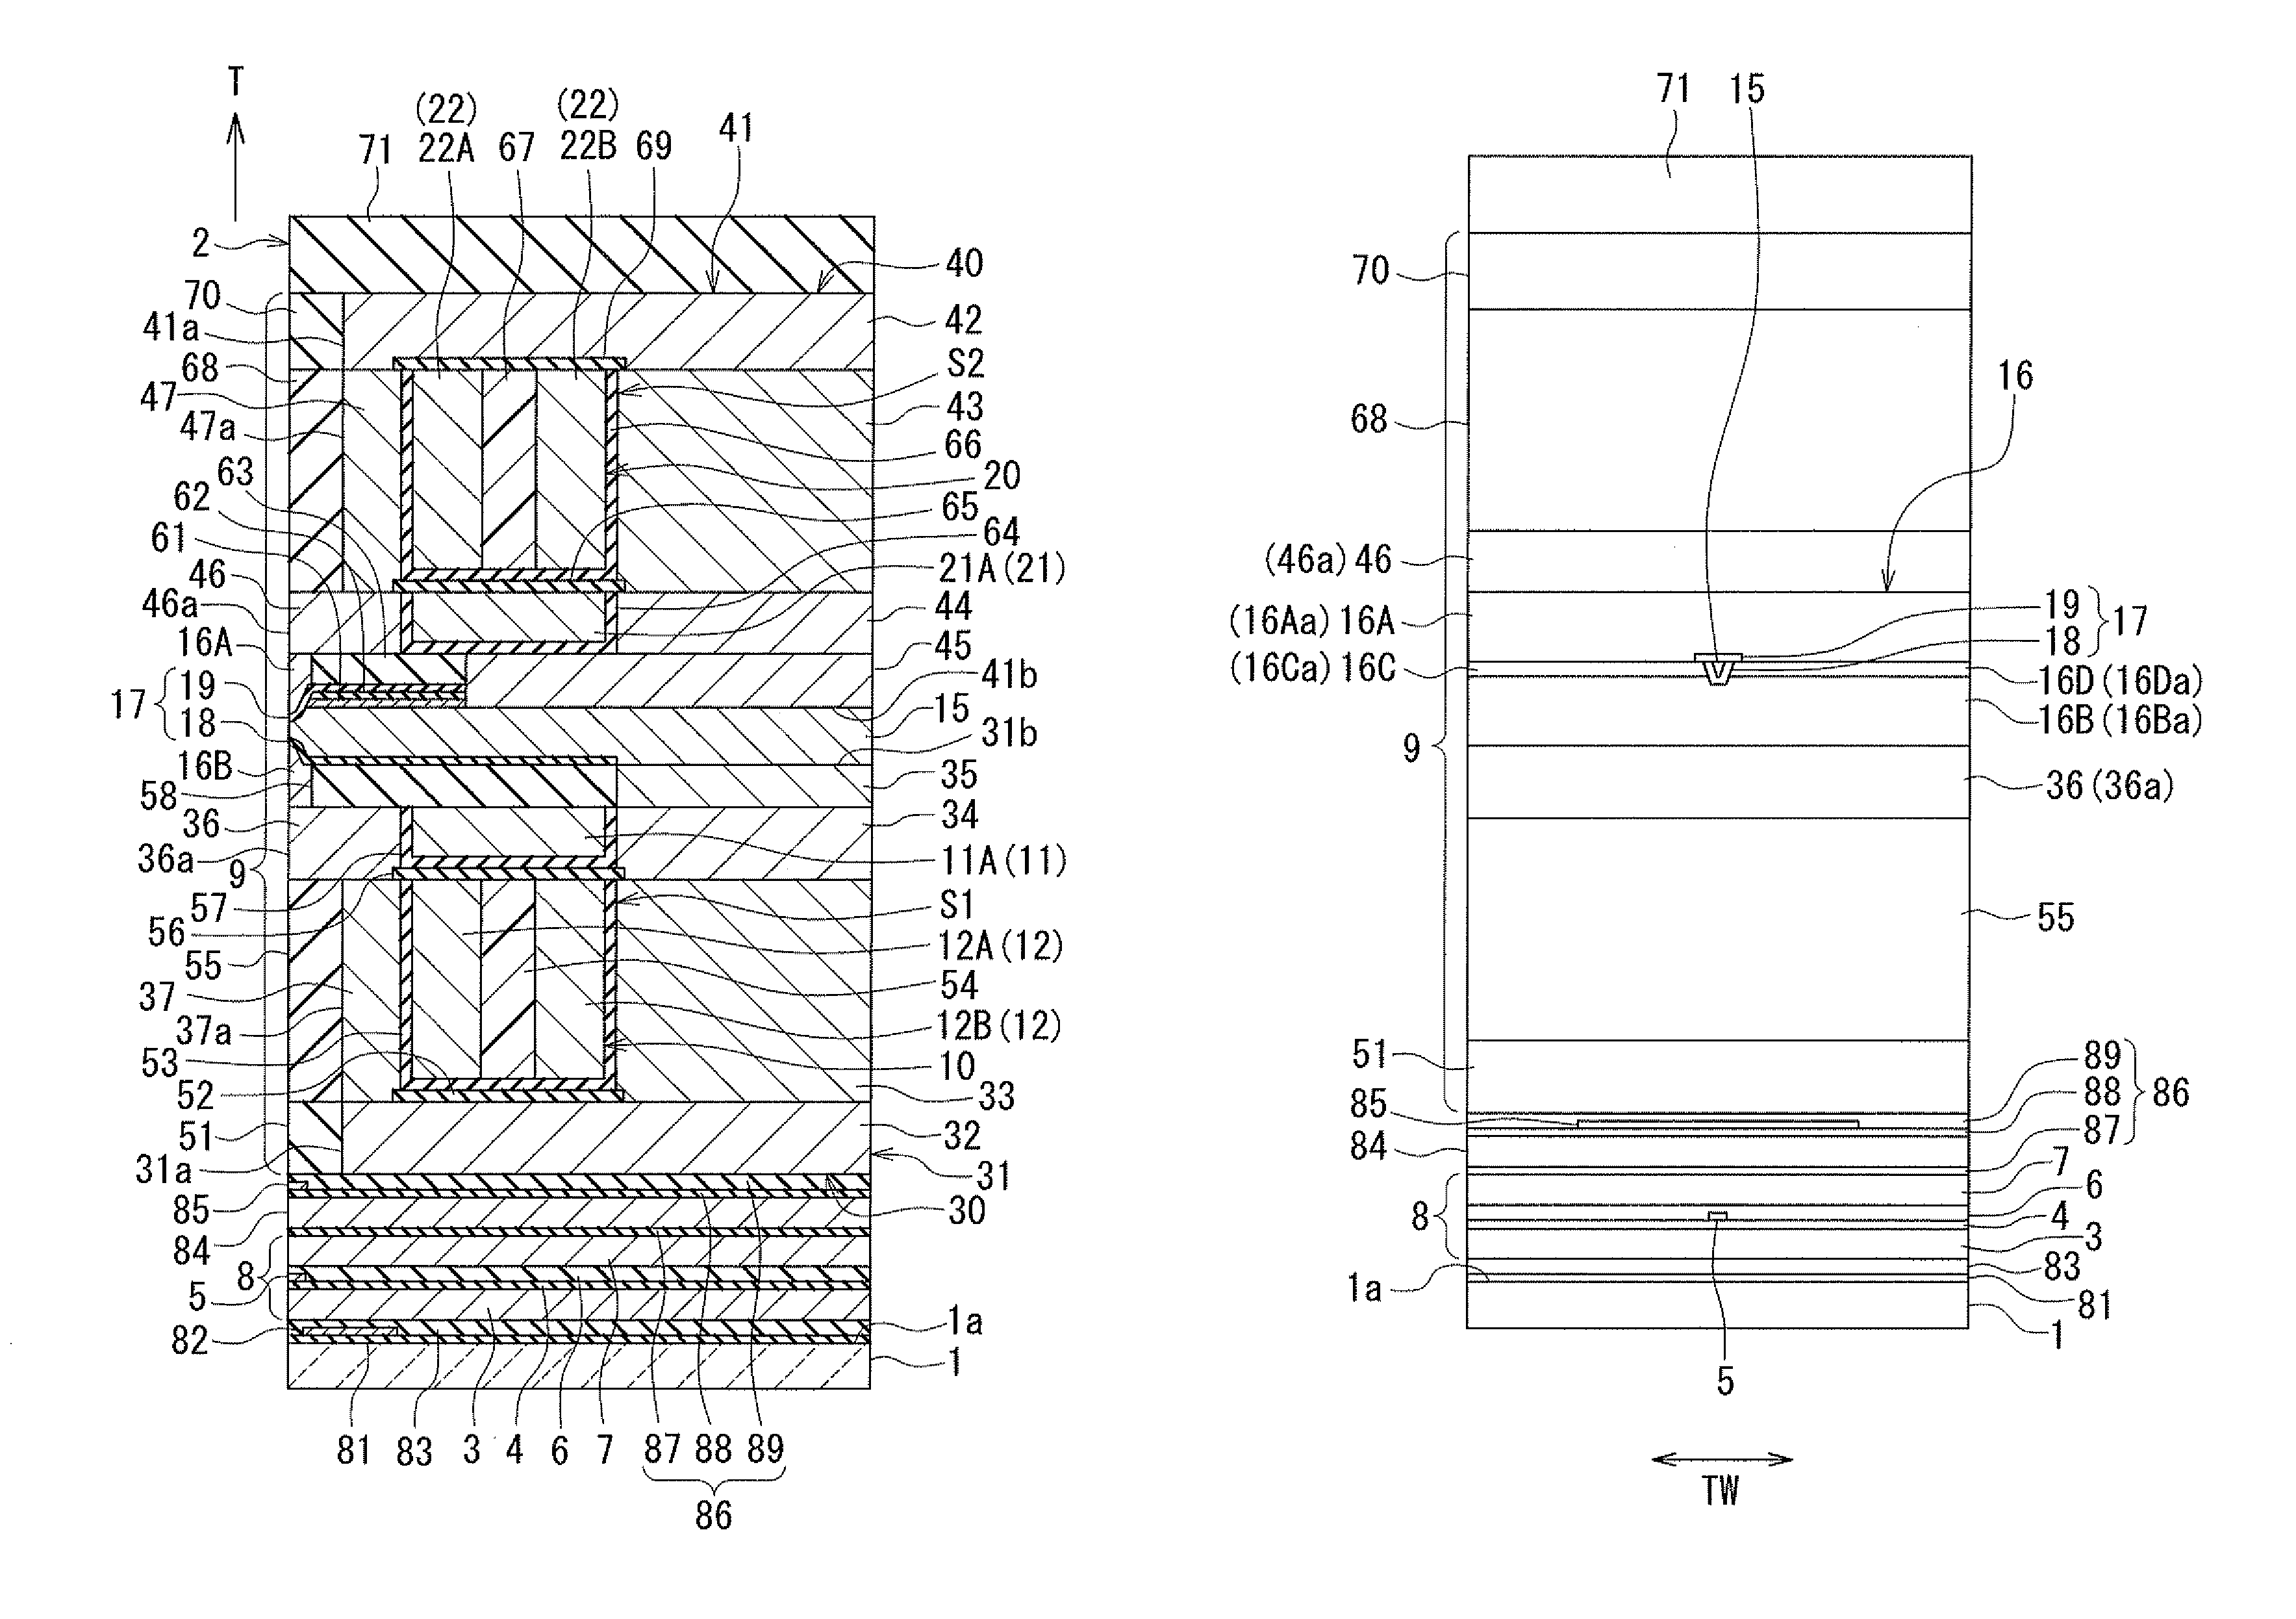 Magnetic head for perpendicular magnetic recording having a main pole and a shield and specifically structured and located coil elements and magnetic coupling layers